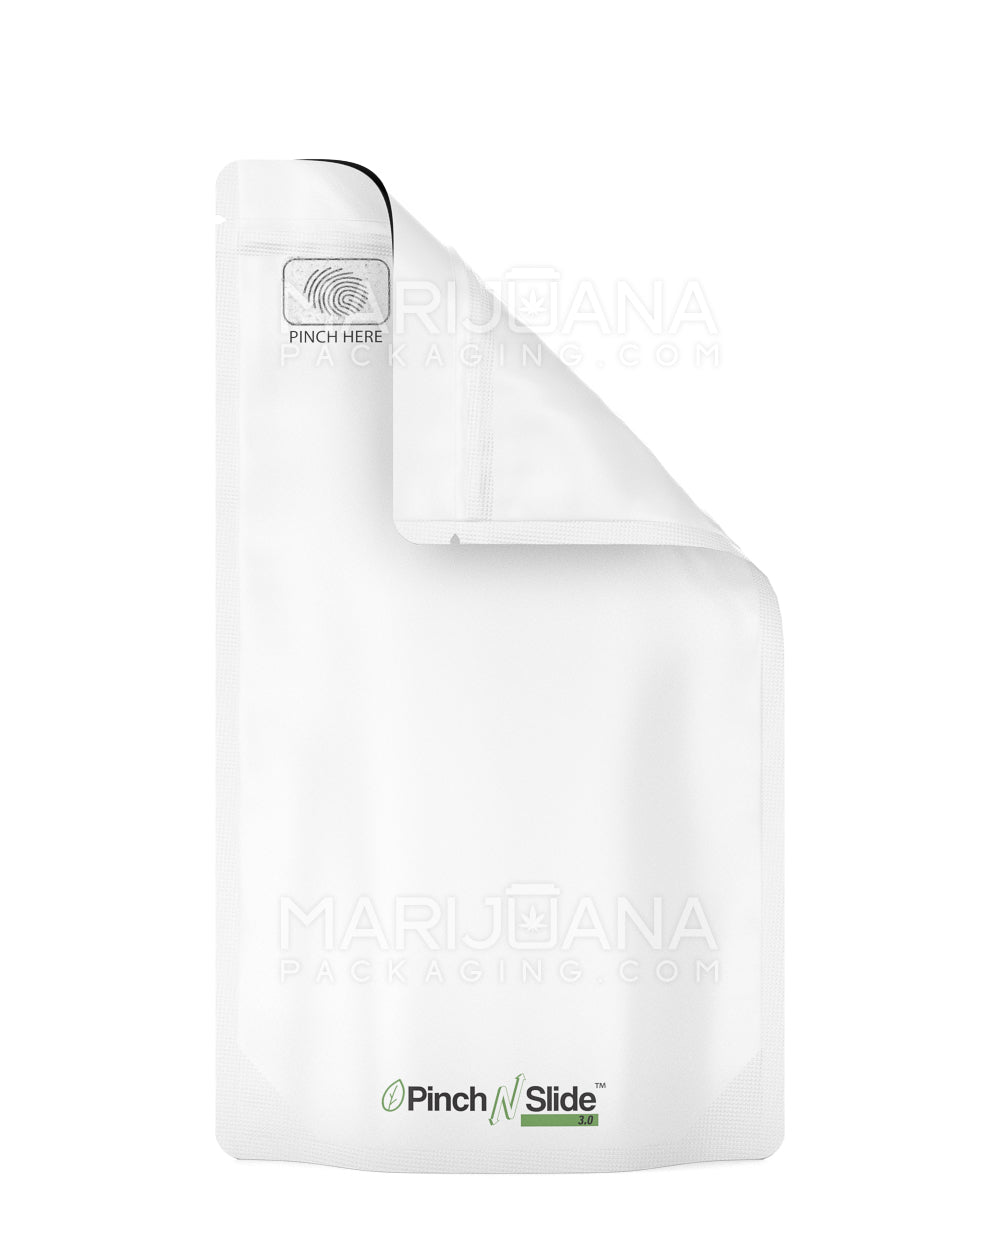 Child Resistant & Tamper Evident | Pinch N Slide 3.0 Matte White PCR Mylar Bags | 5in x 8.8in - 14g - 250 Count